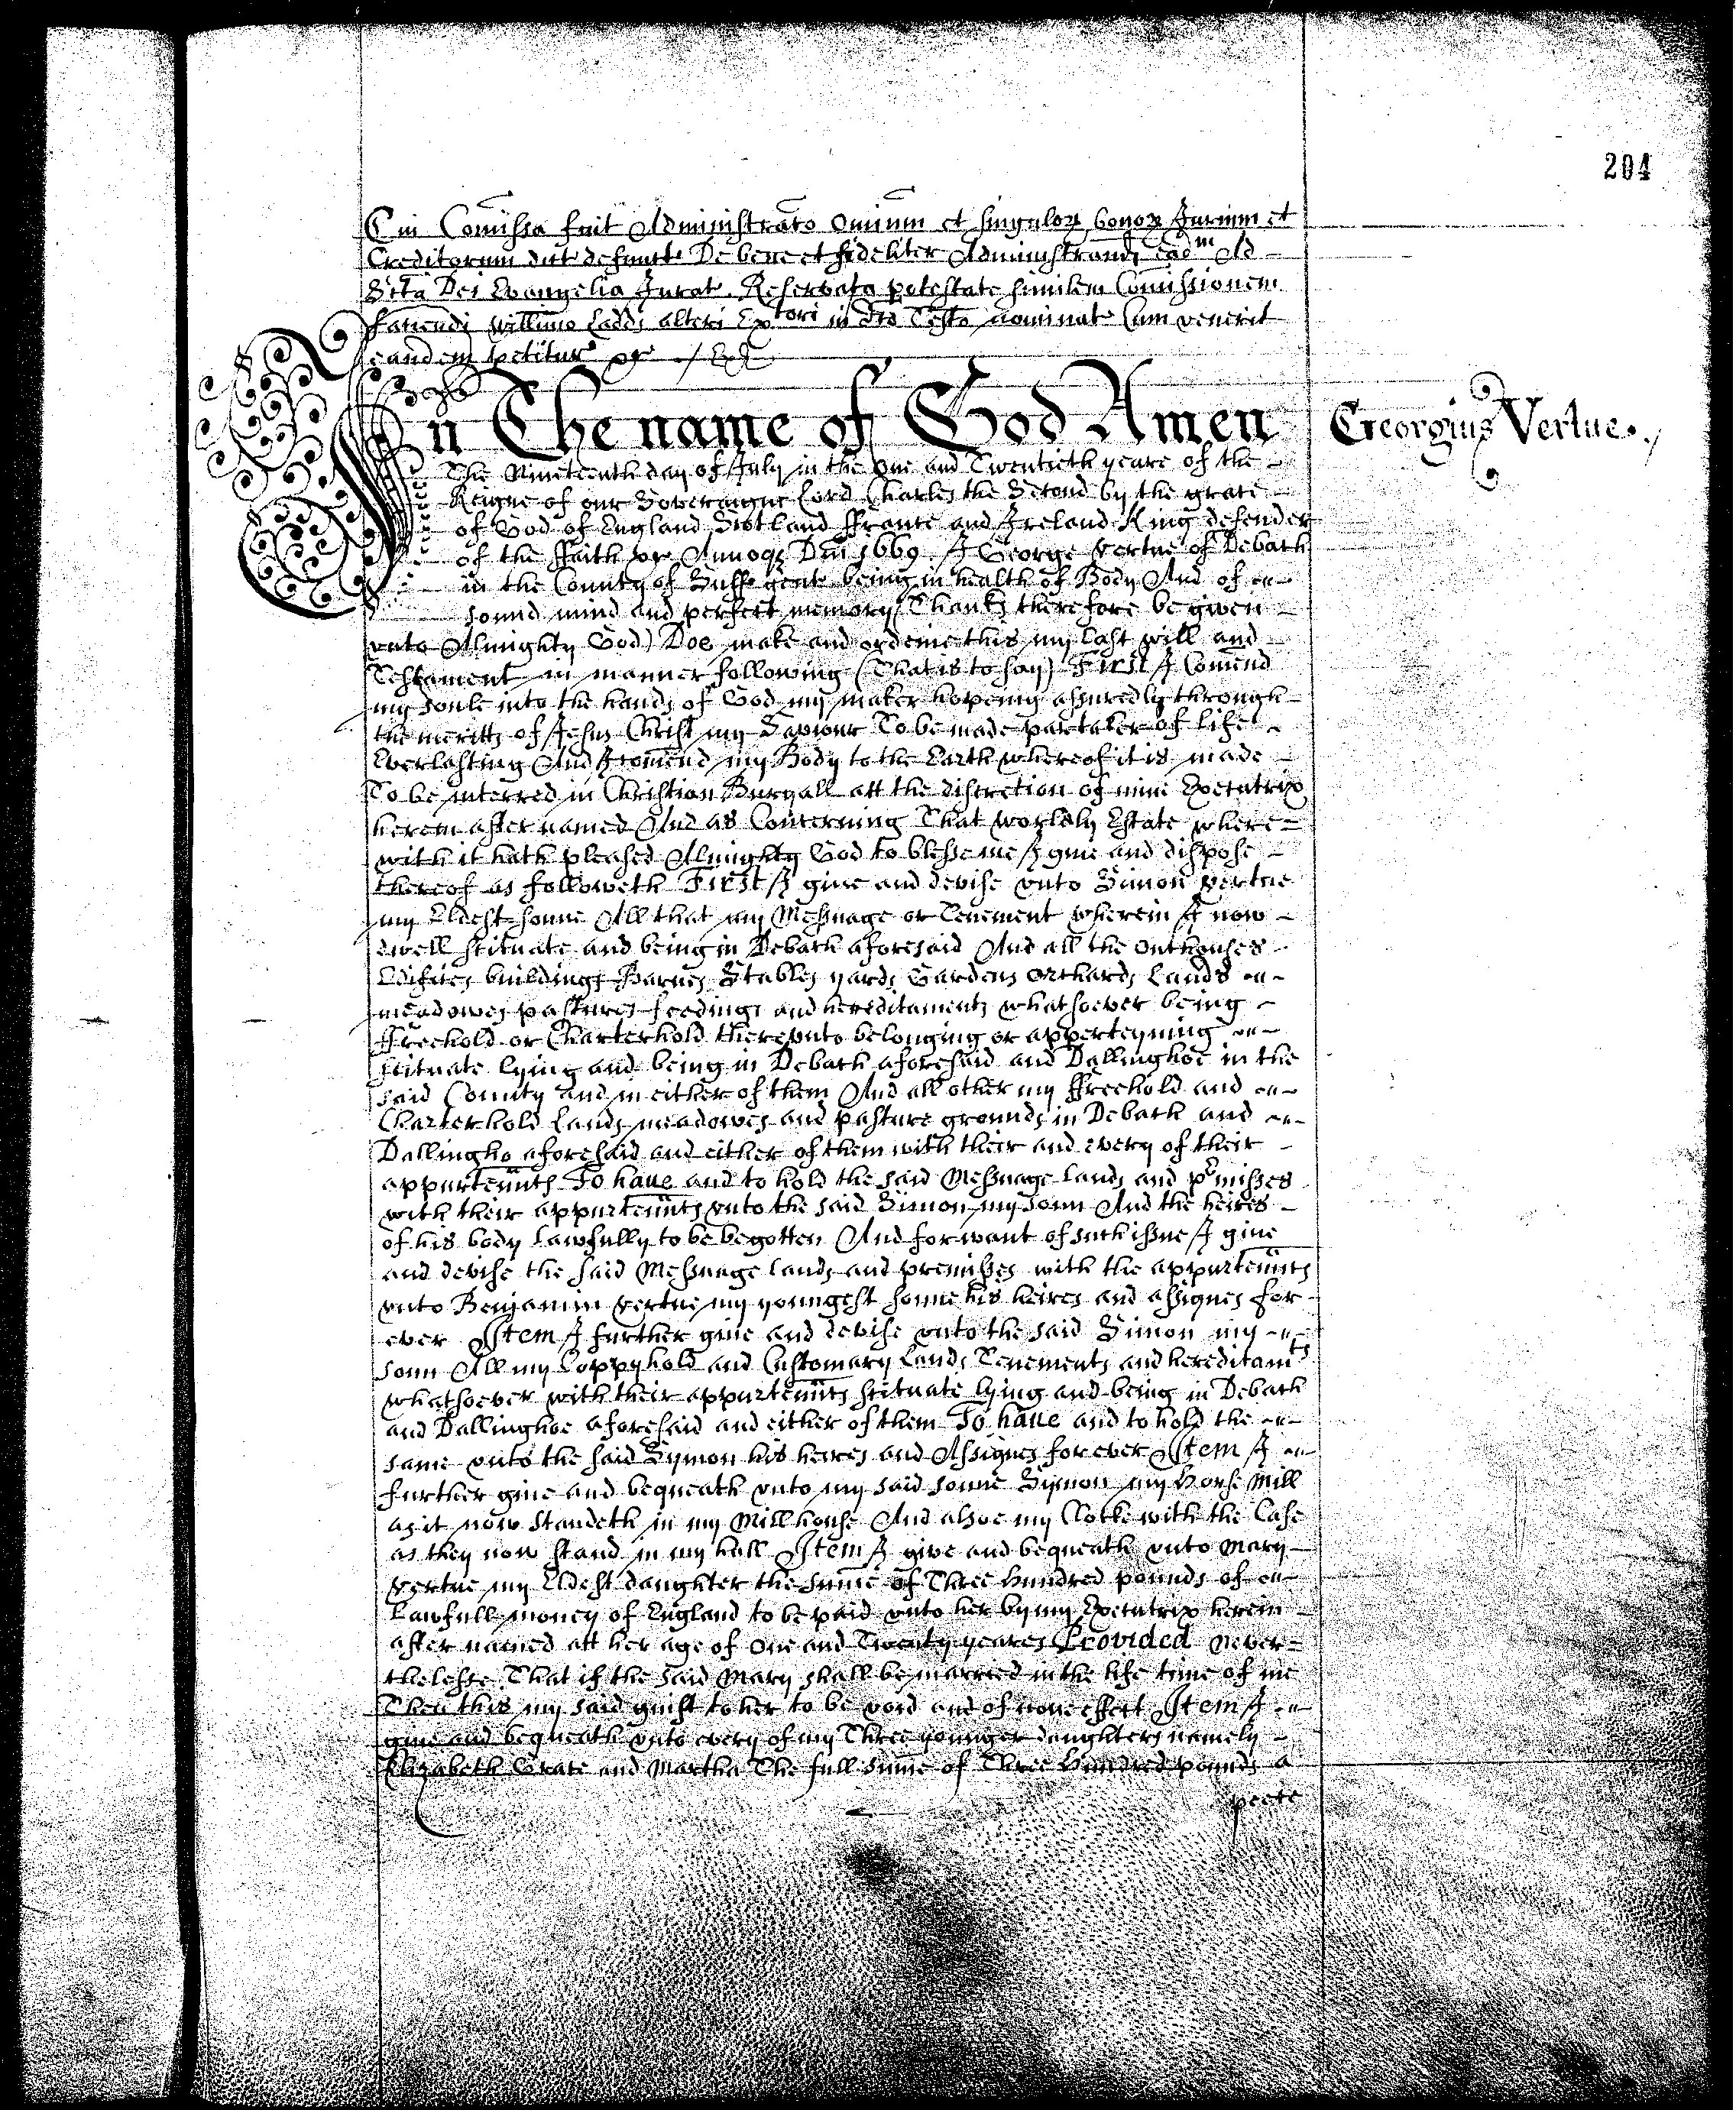 The last will and testament of Georgius Vertue, 1669 in which he confirms names of children and wife Mary as well as showing his ownership of a shipbuilding business and various land/messuages. Page 1